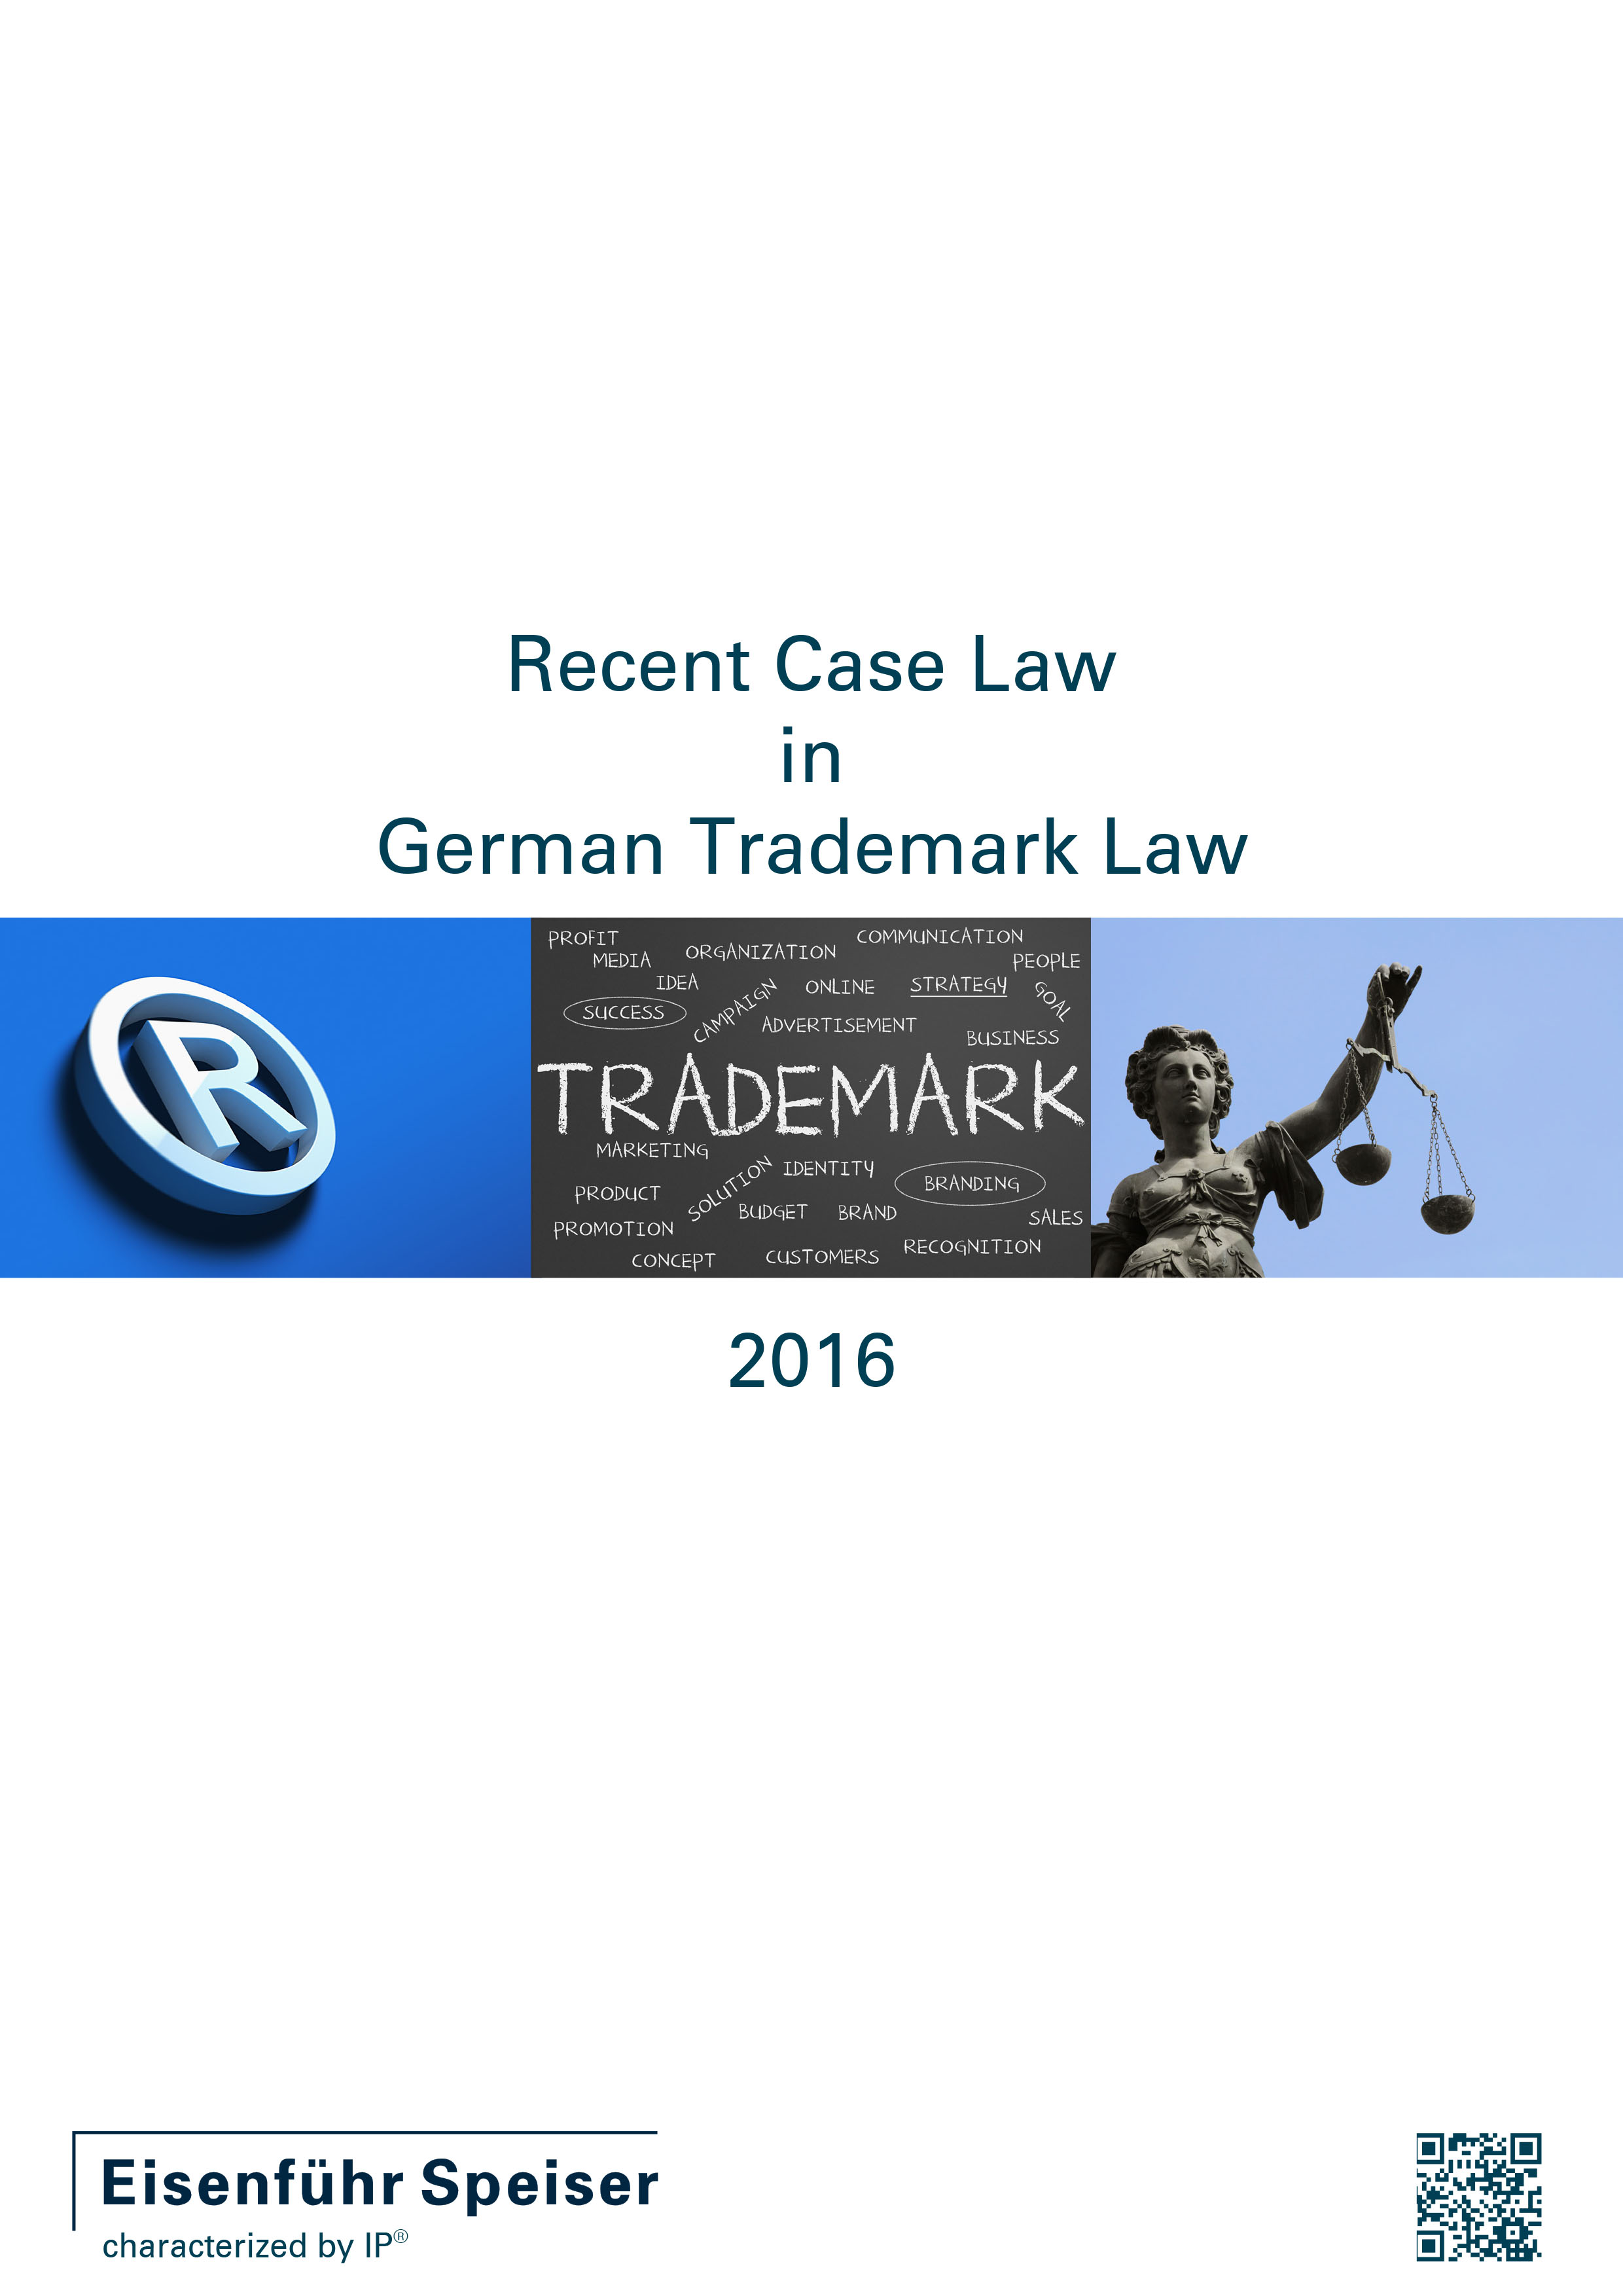 Recent Case Law in German Trademark Law 2016